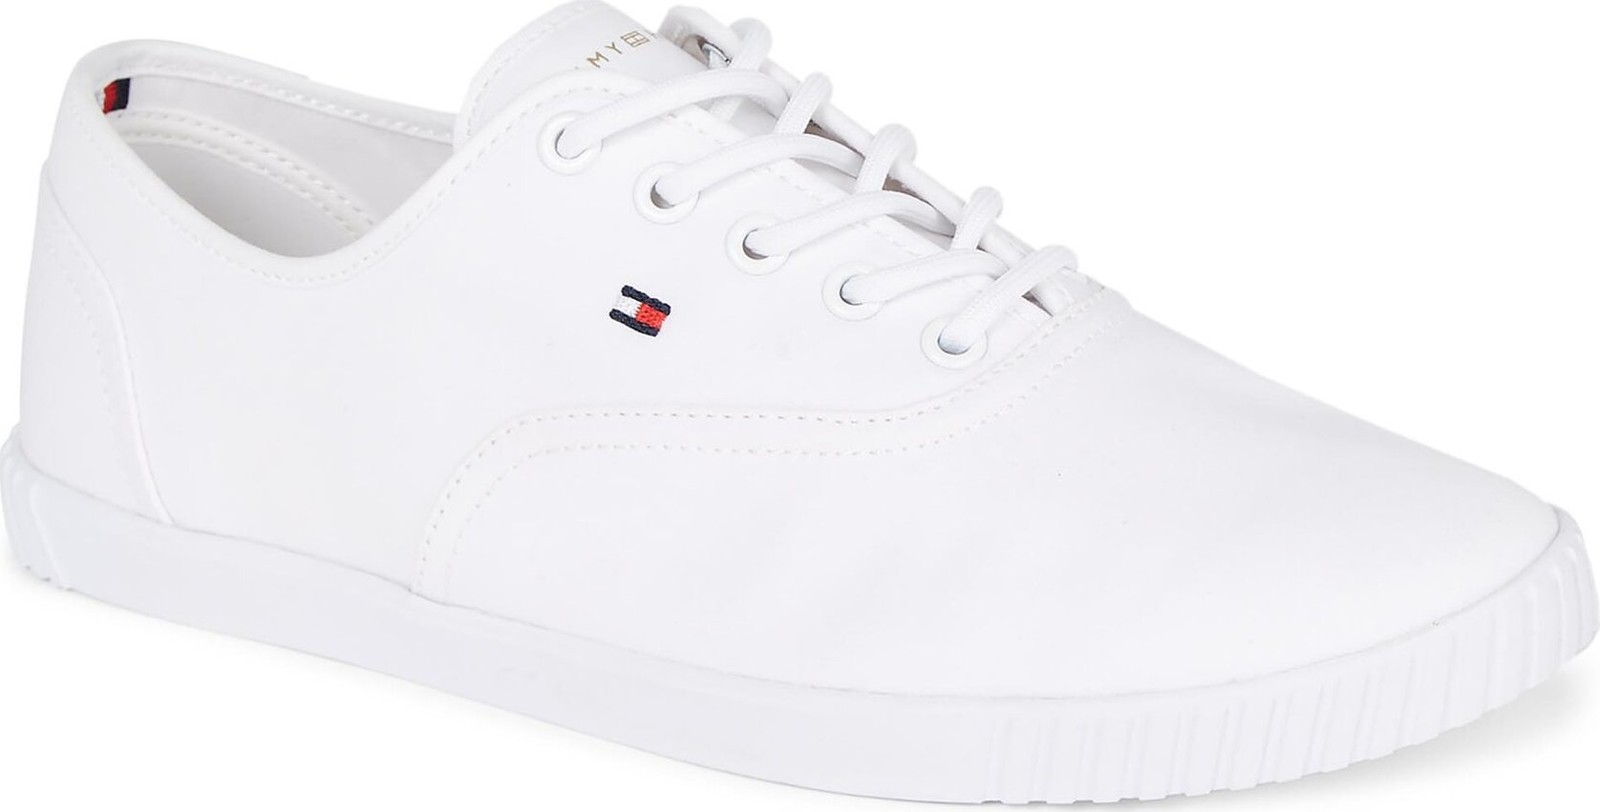 Tenisky Tommy Hilfiger Canvas Lace Up Sneaker FW0FW07805 White YBS